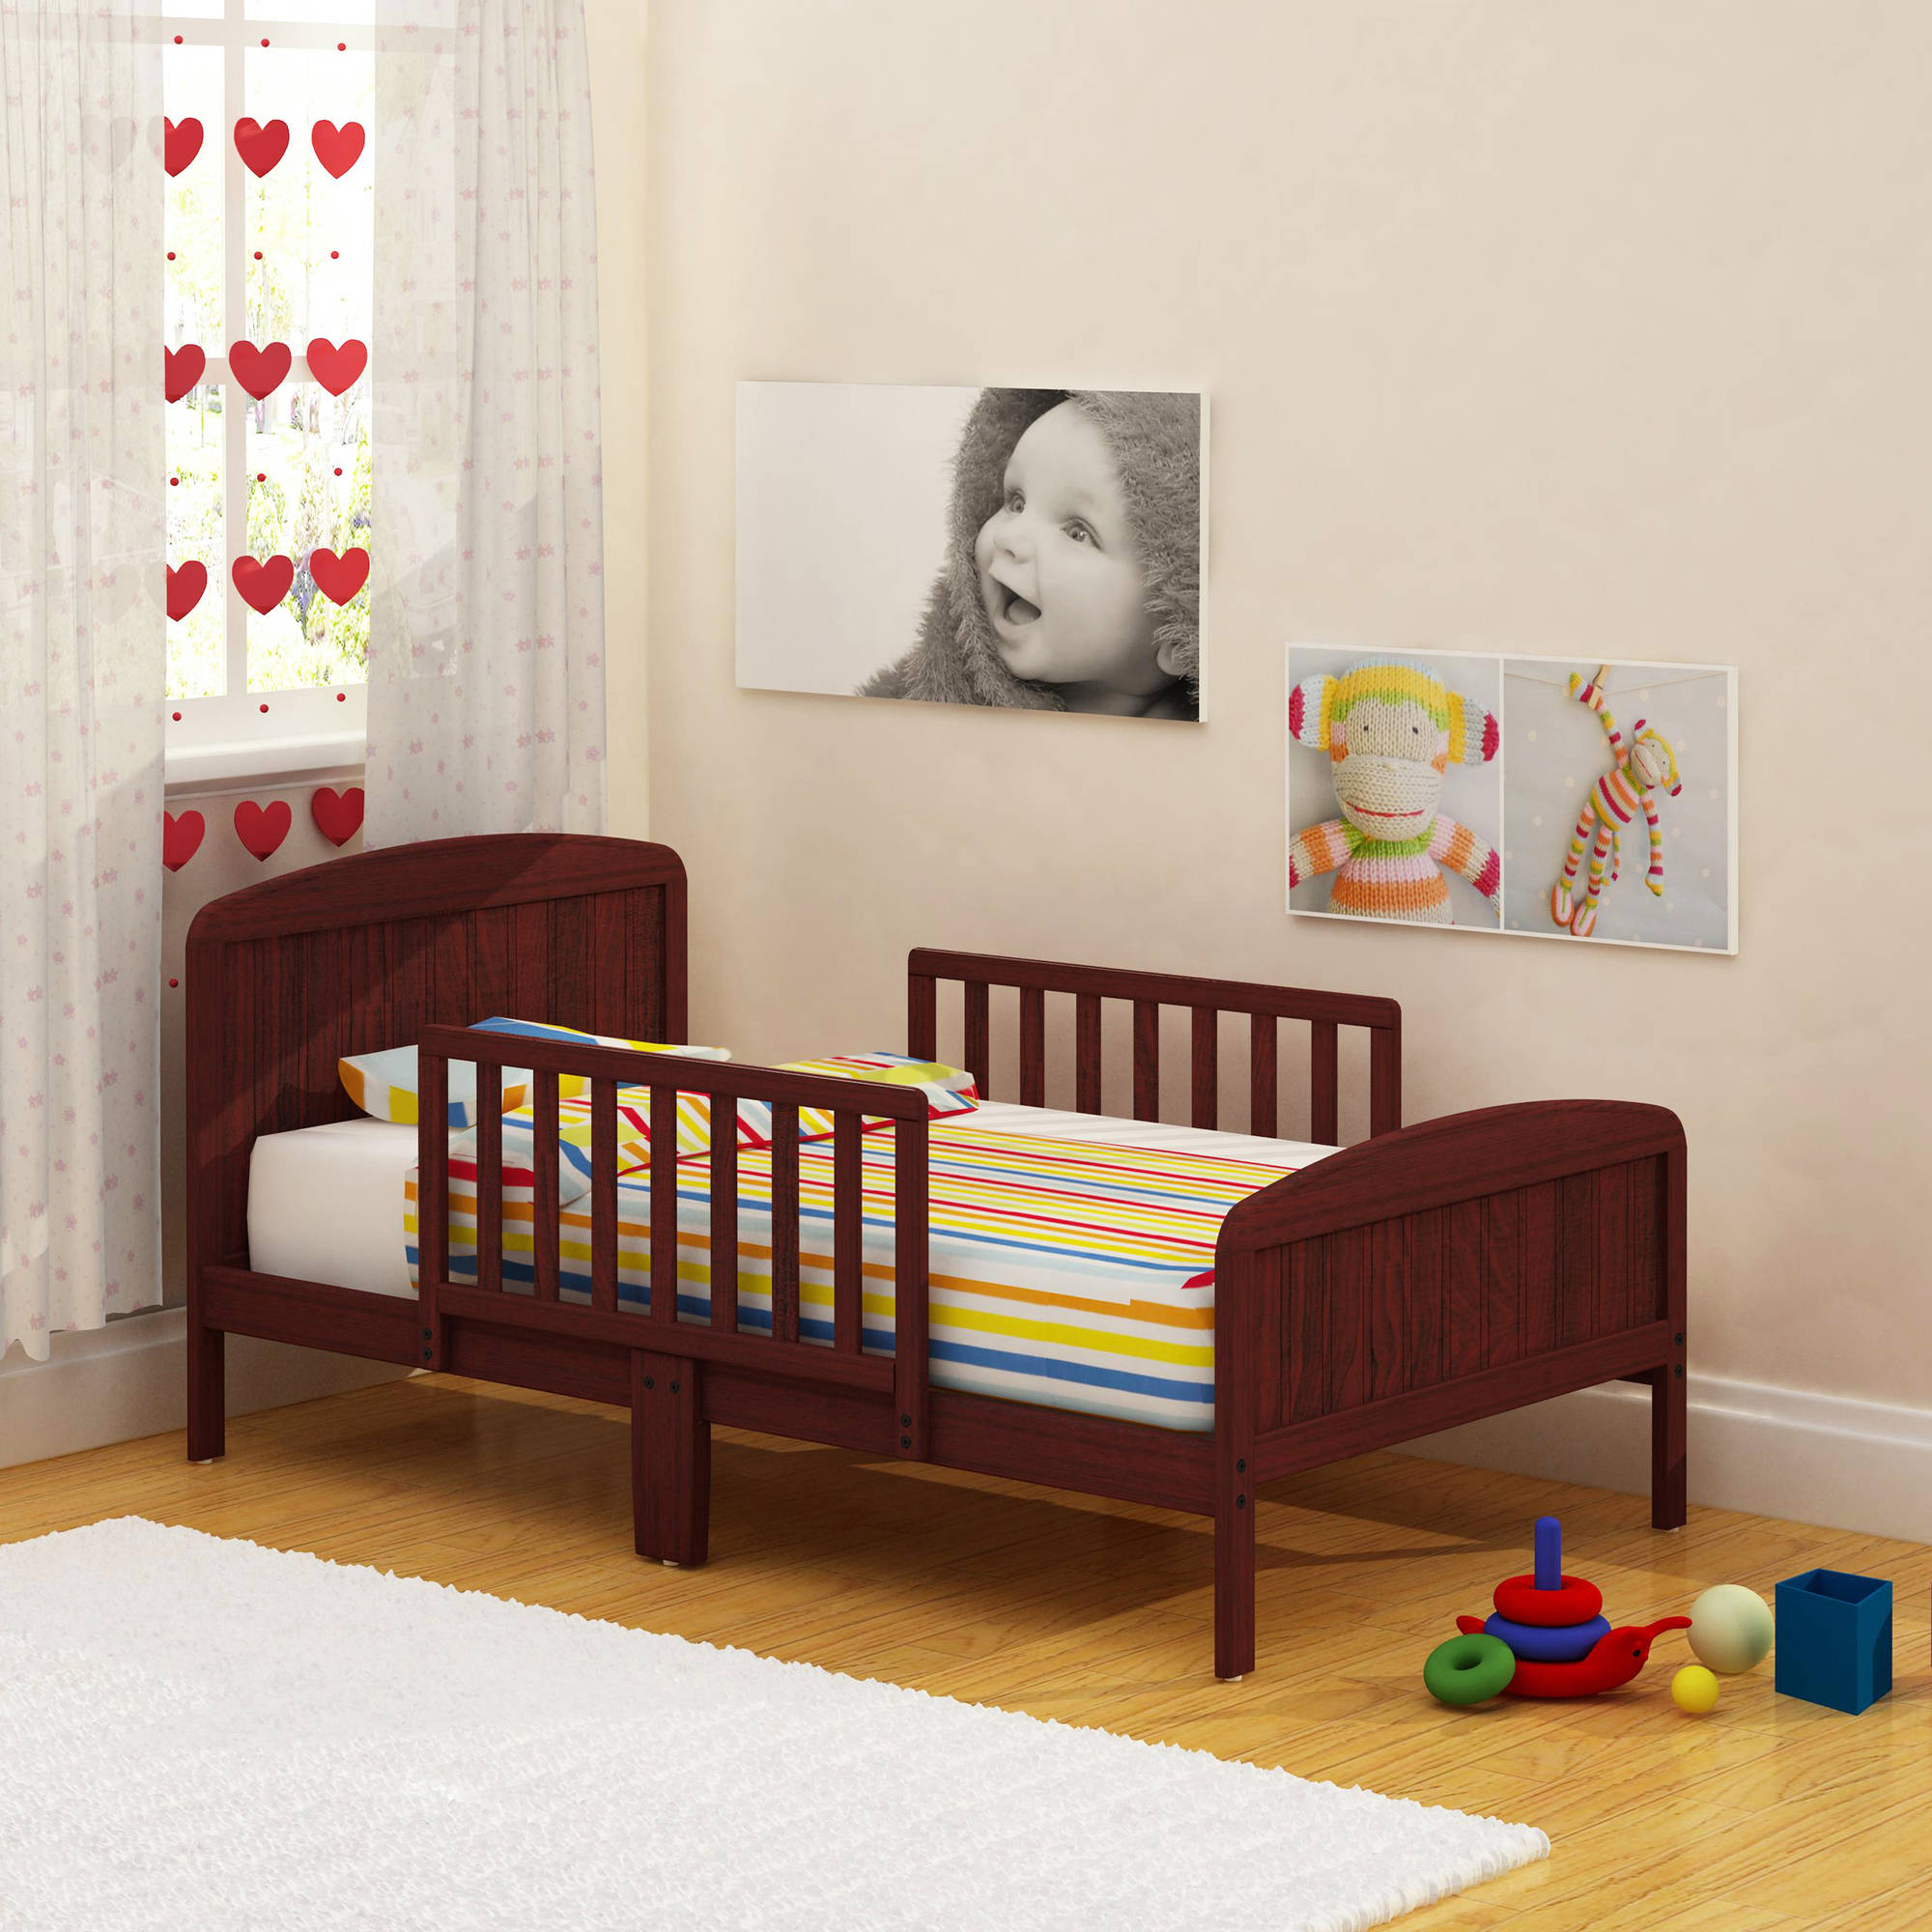 Beds for 4-years-old russell children harrisburg xl wooden toddler bed, cherry - walmart.com SNGLTXG